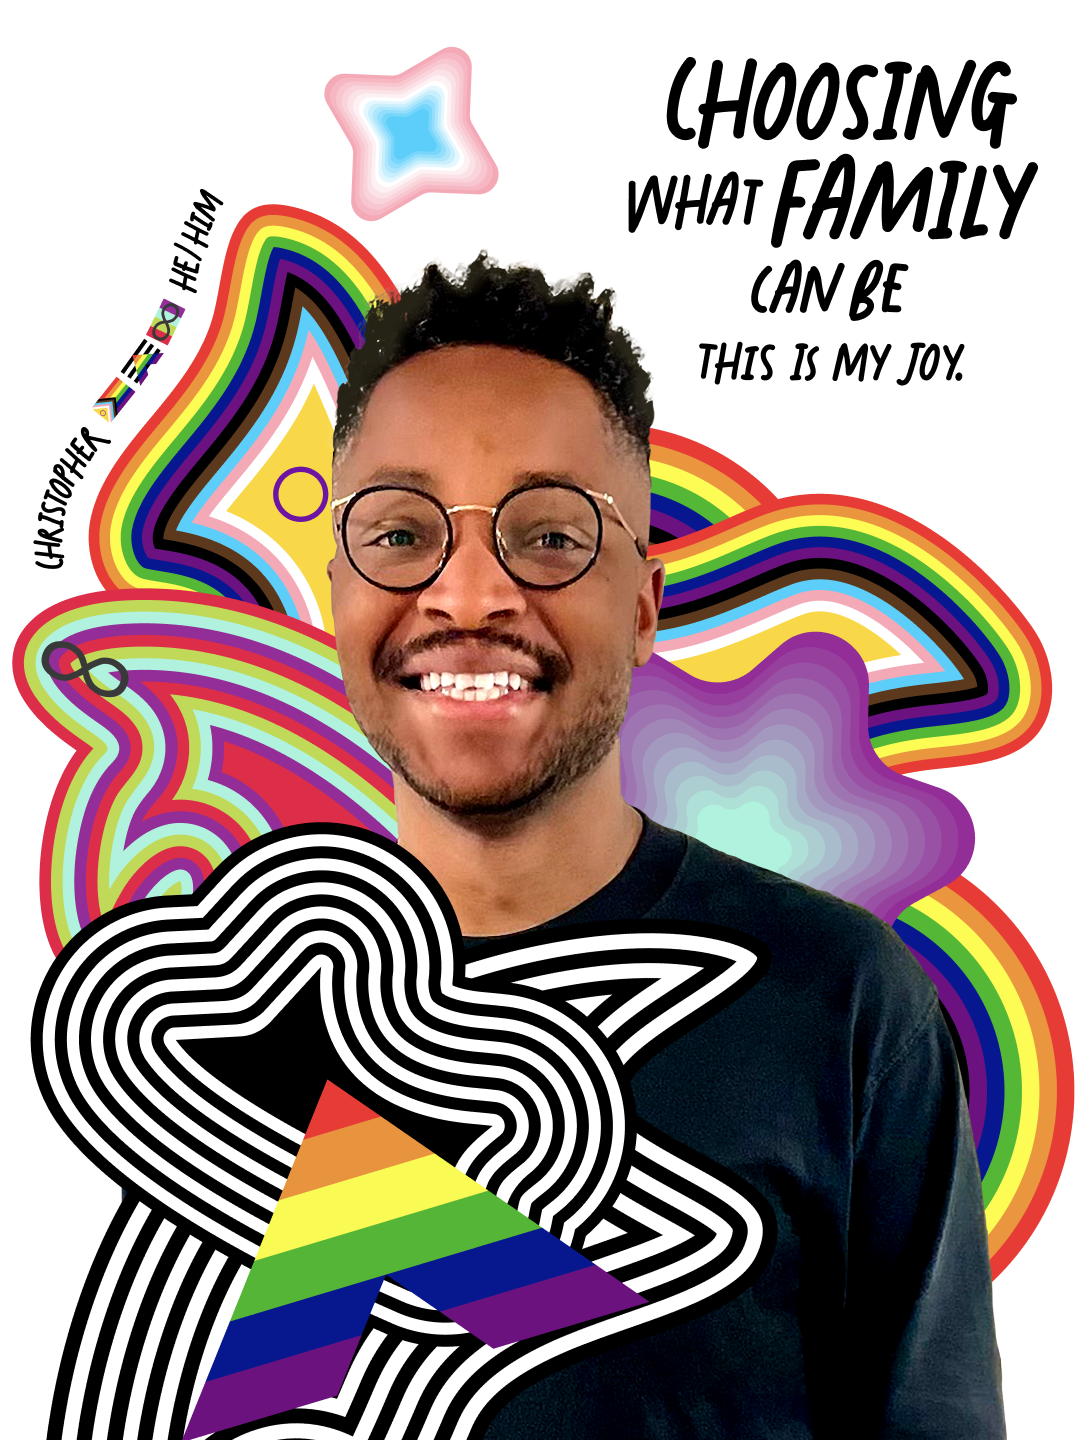 A person with round glasses smiles in front of a colorful, rainbow background. Text reads, "CHOOSING WHAT FAMILY CAN BE THIS IS MY JOY." Name and pronouns "Christopher he/him" are on the side.